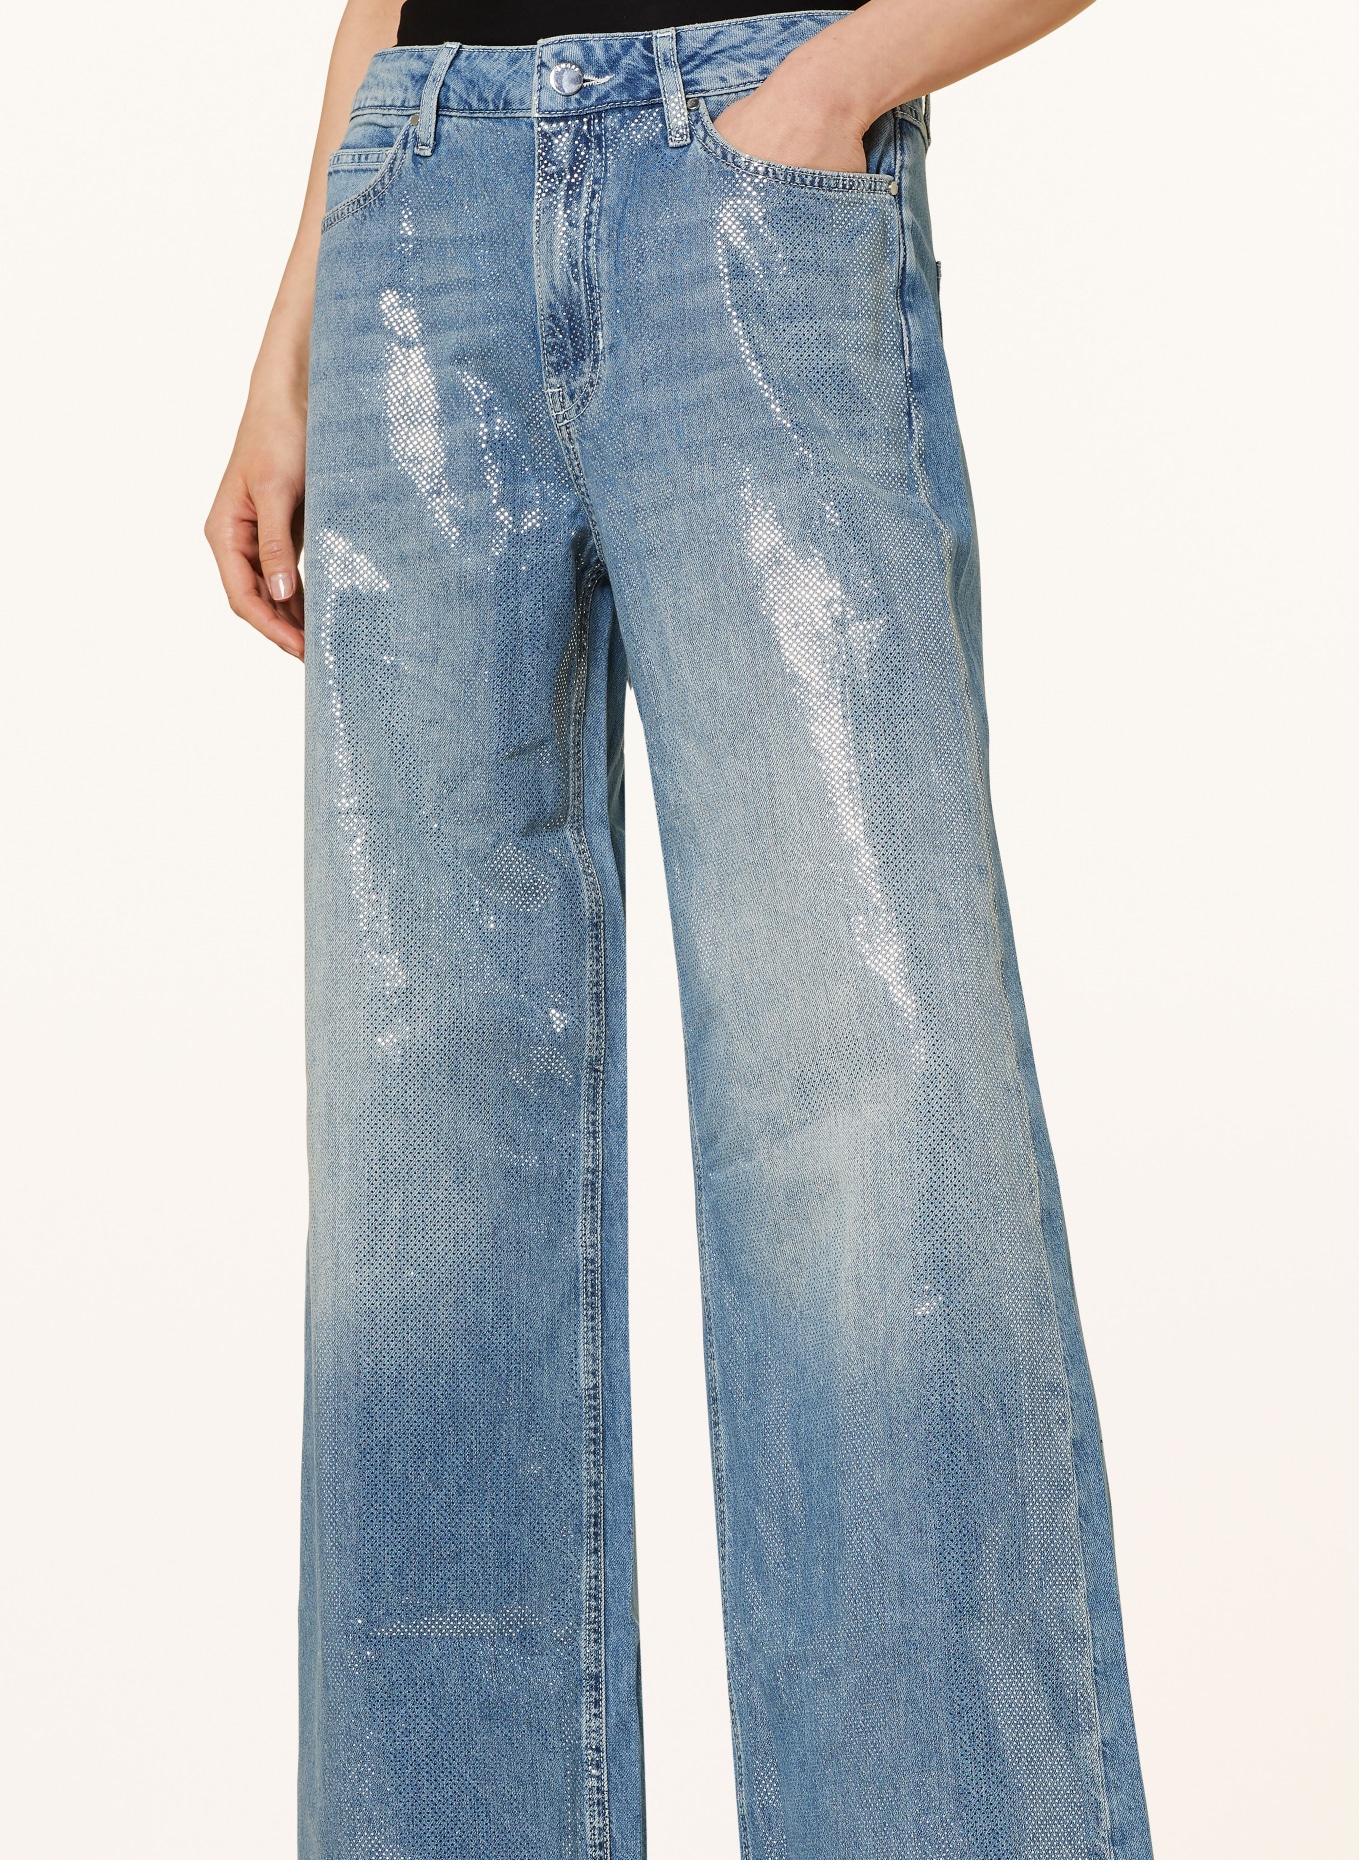 GUESS Straight jeans BELLFLOWER with decorative gems, Color: RIC0 COCORICO (Image 5)